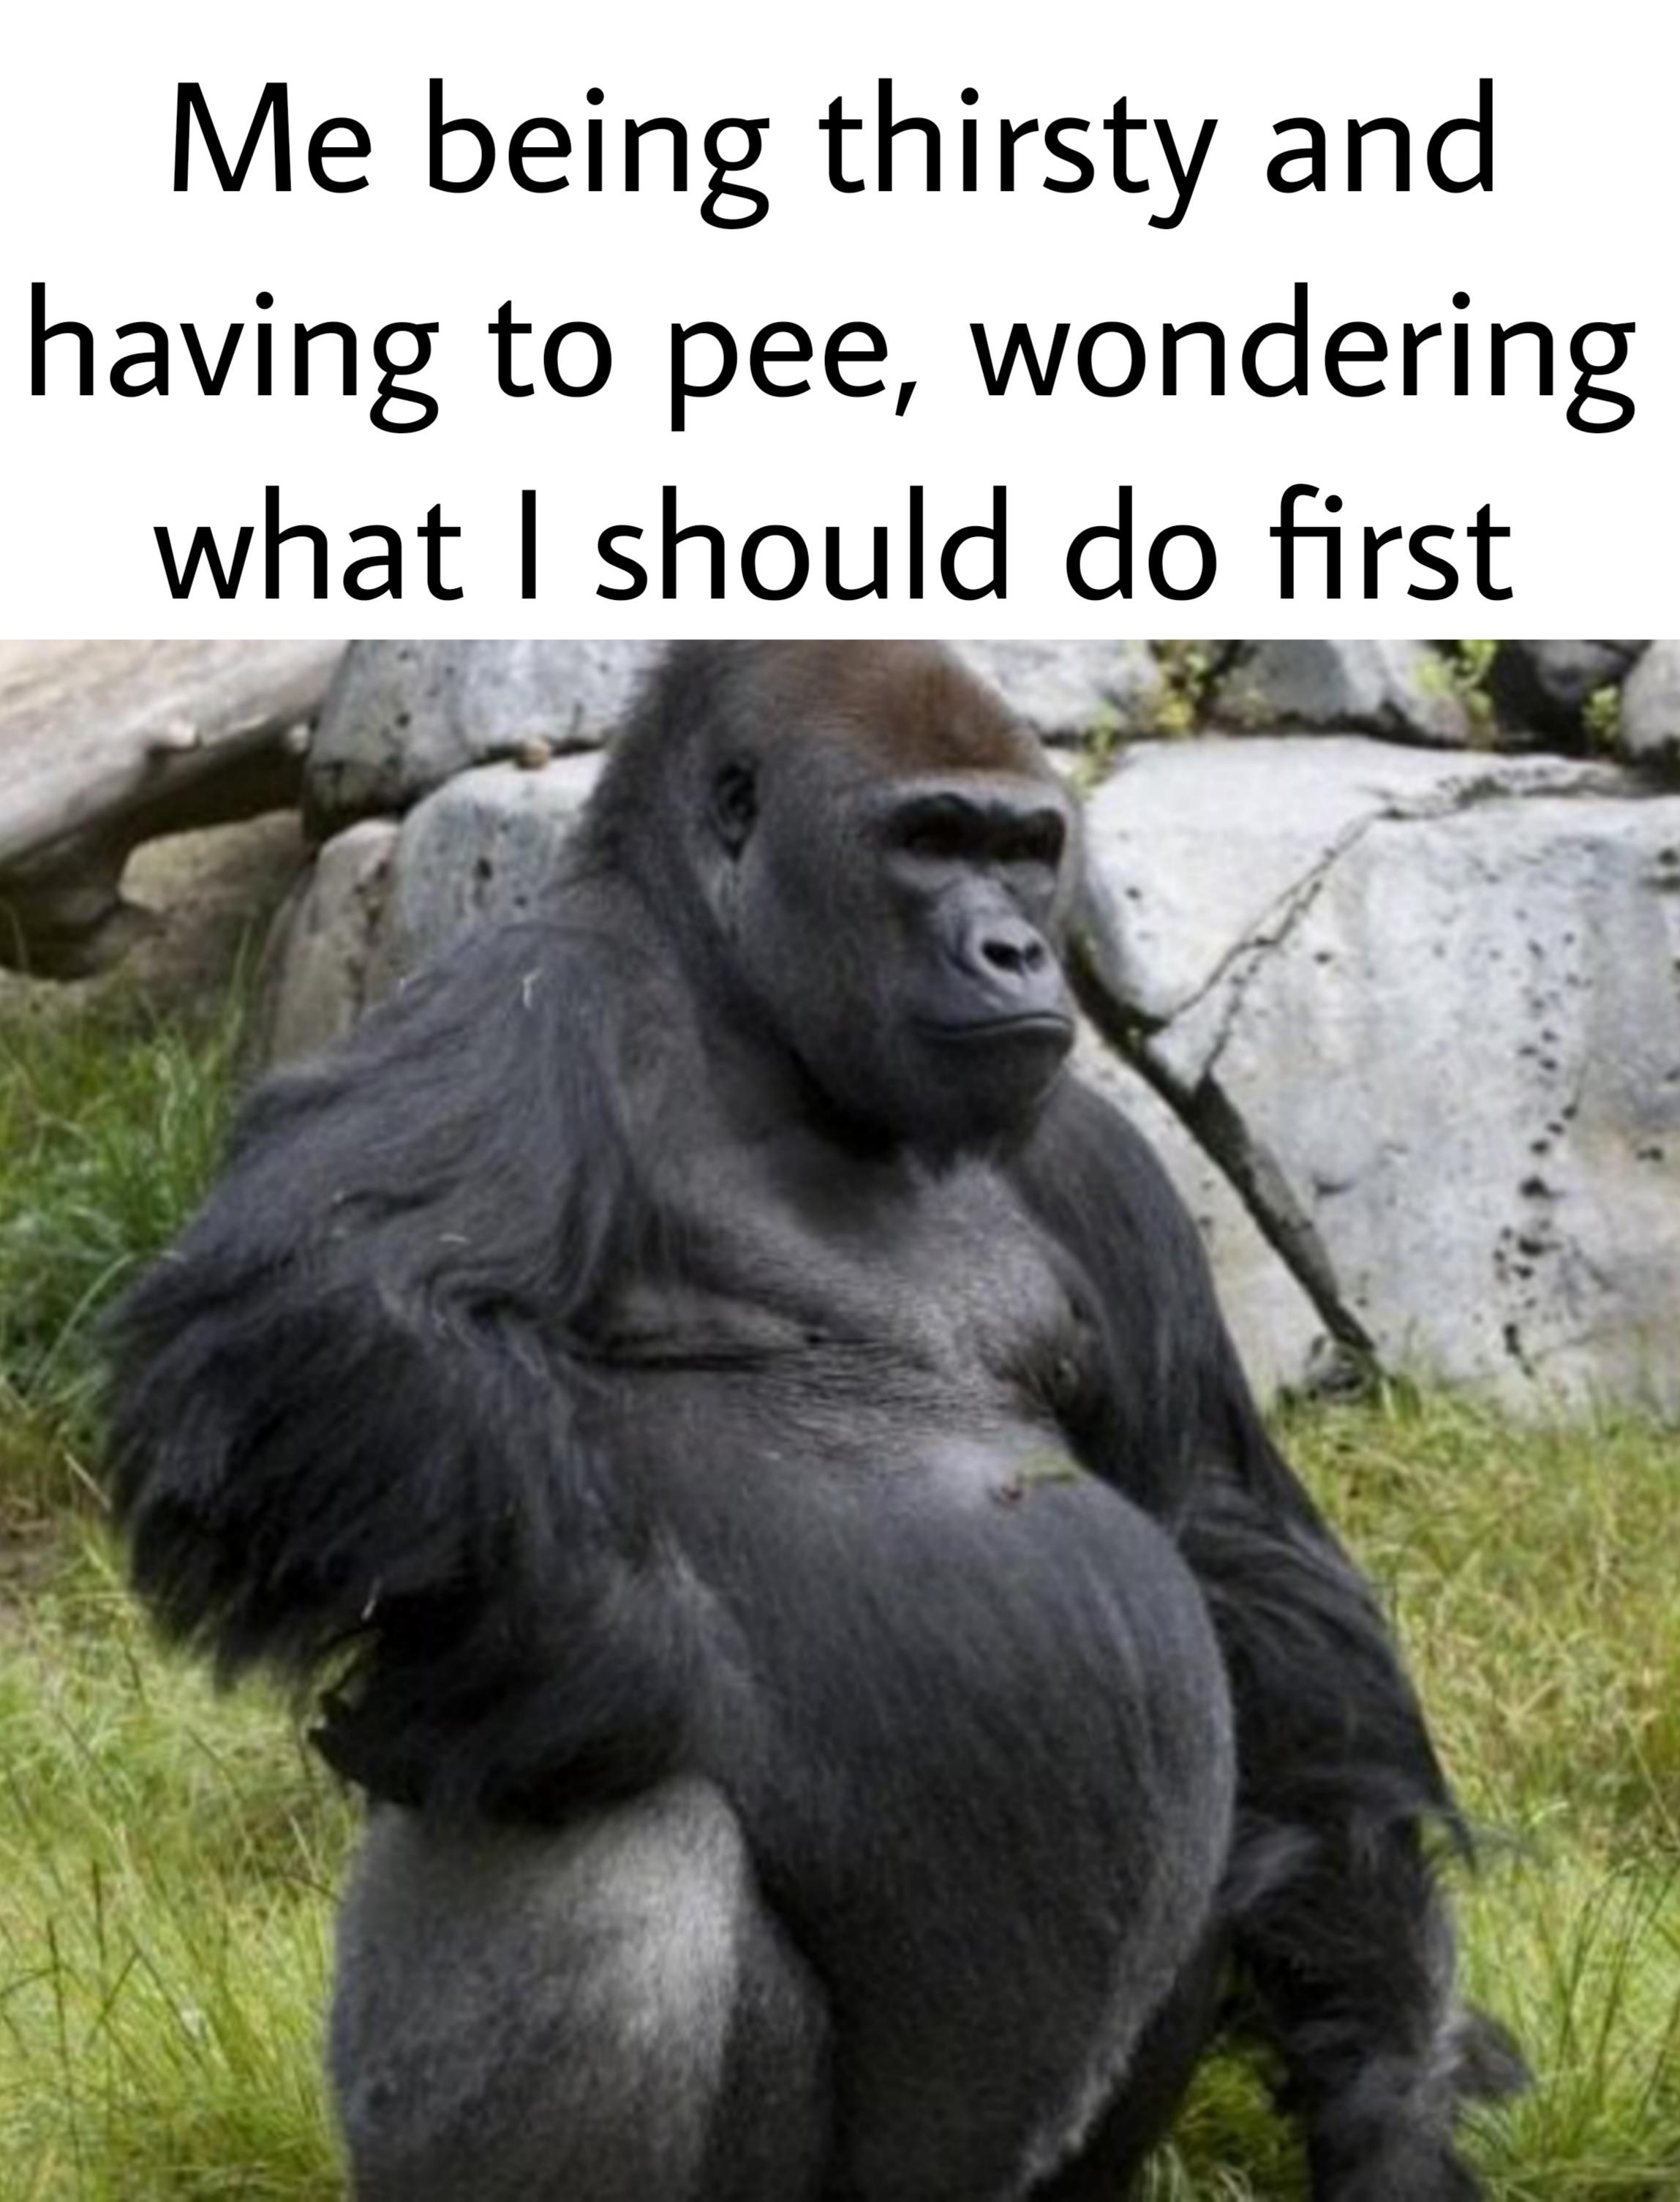 funny memes and pics - Me being thirsty and wondering having to pee, what I should do first